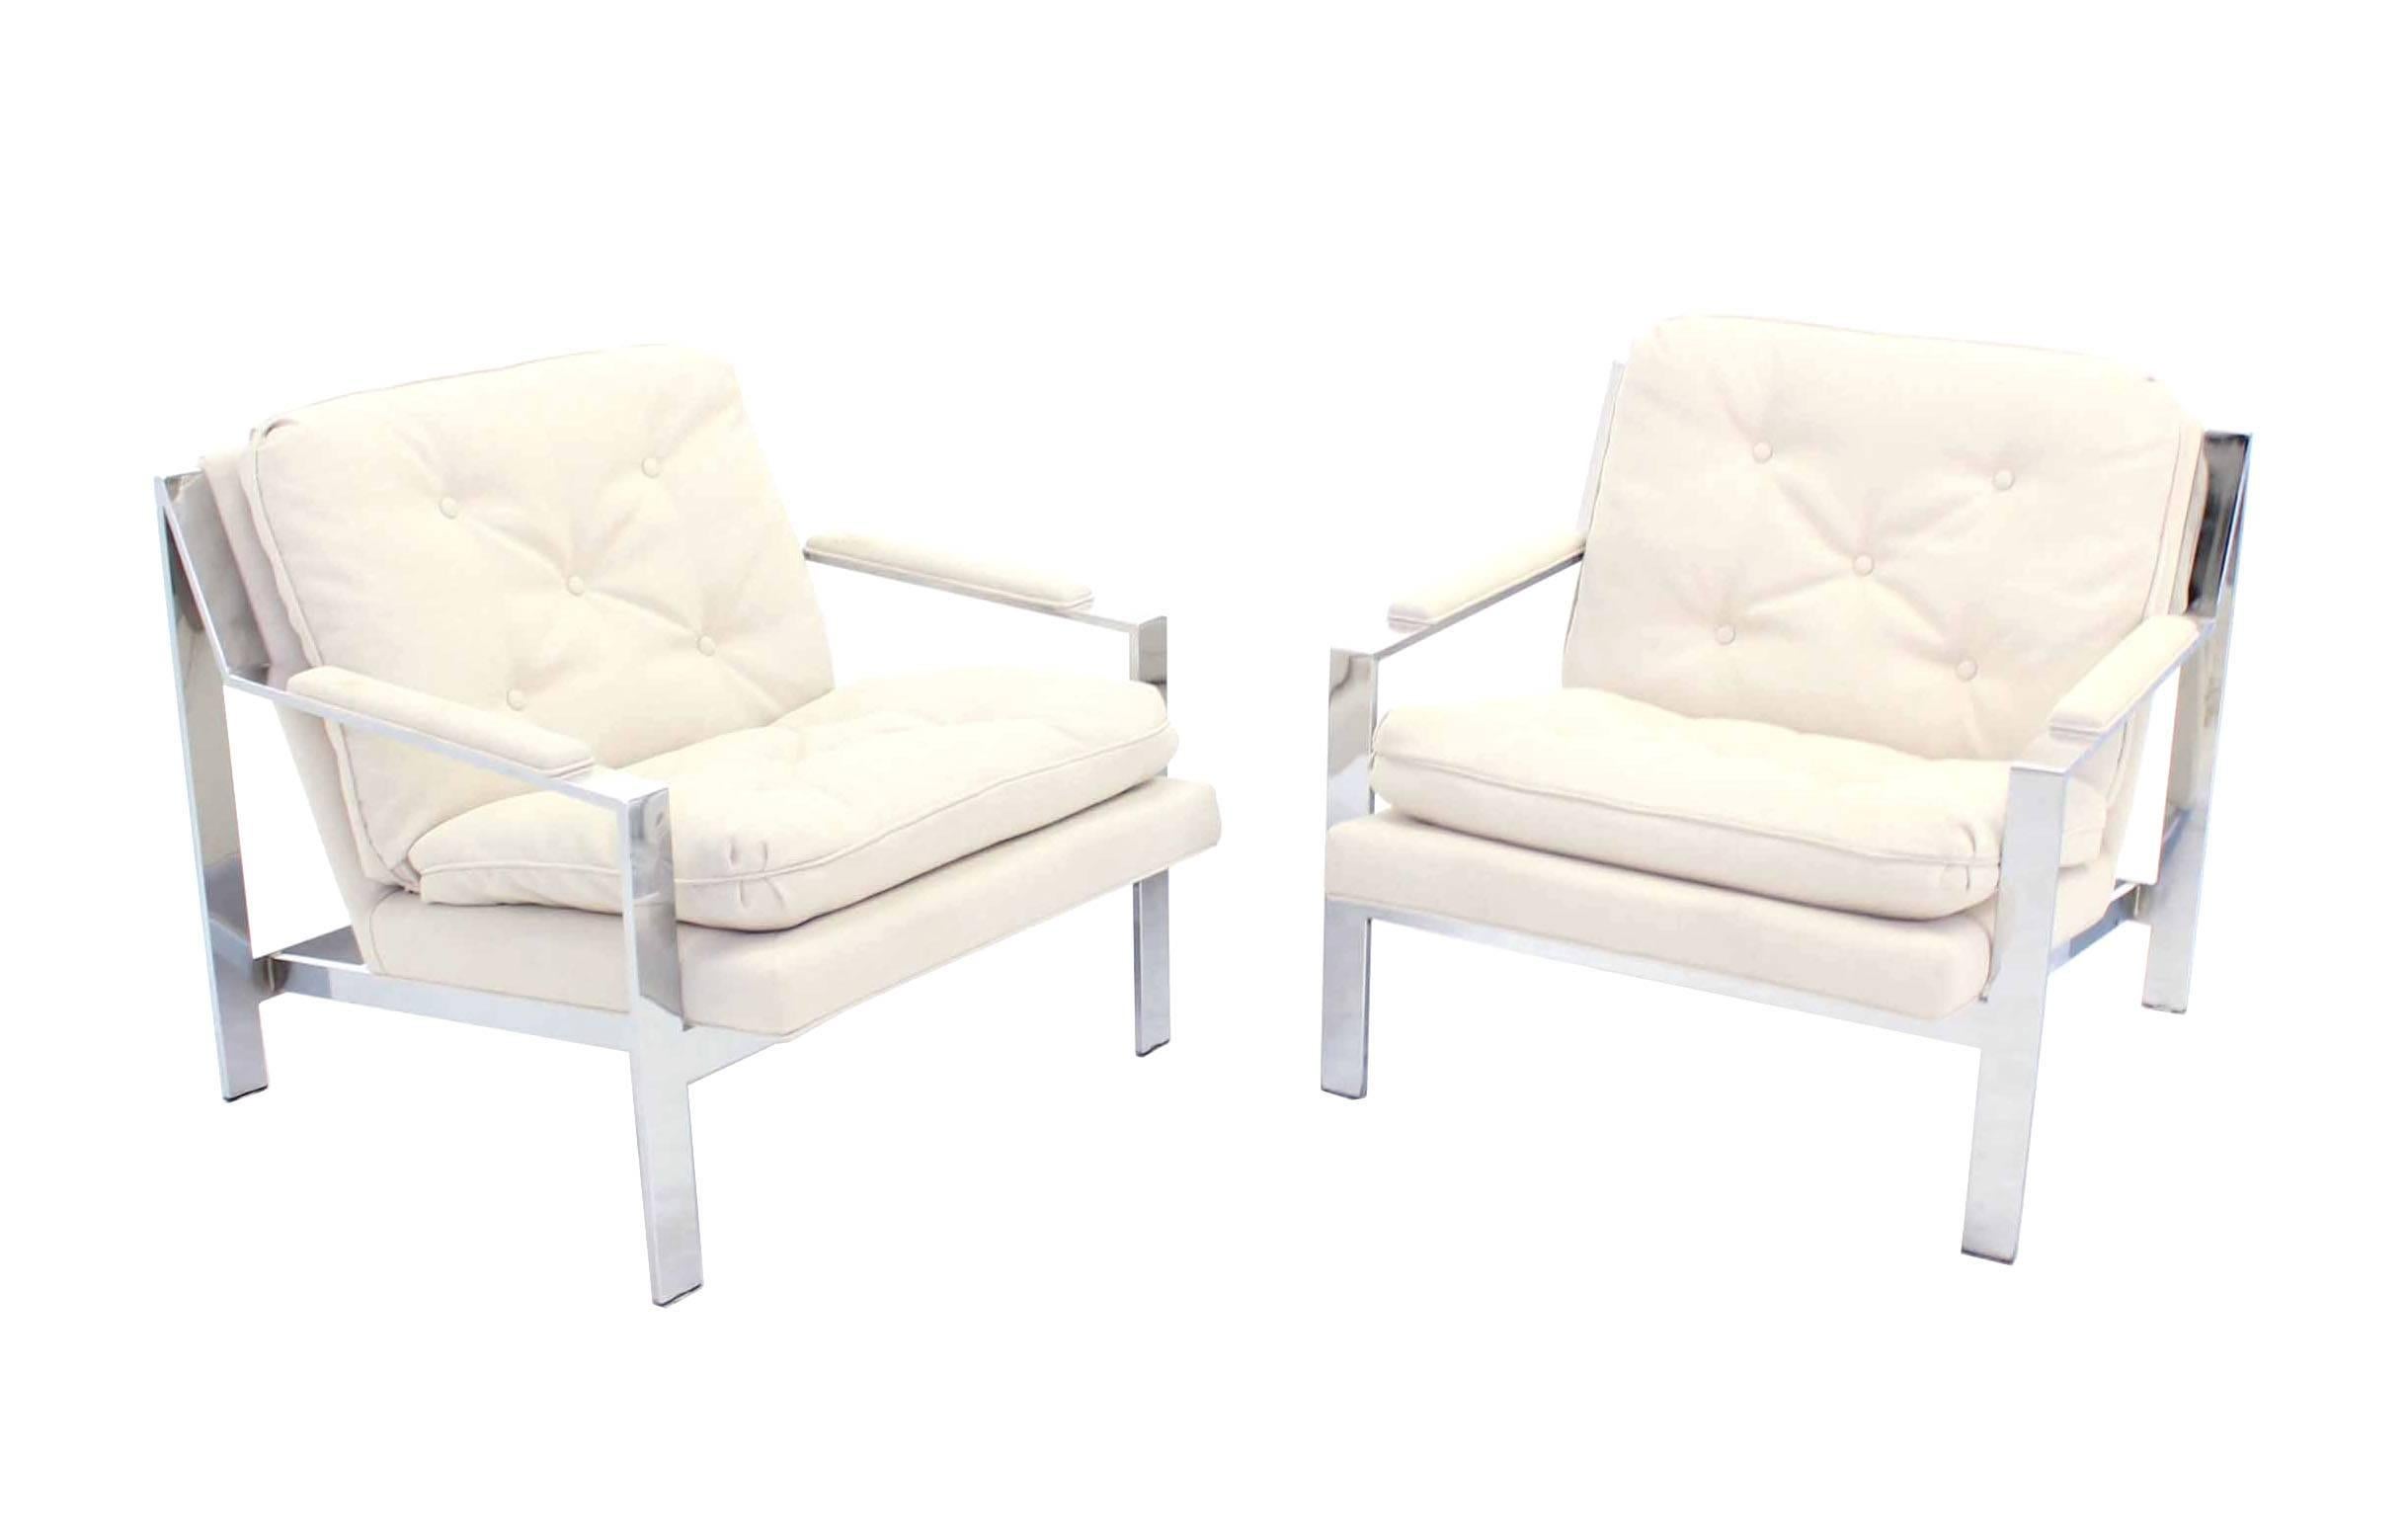 Pair of nice newly upholstered white linen-like fabric Cy Mann lounge chairs.